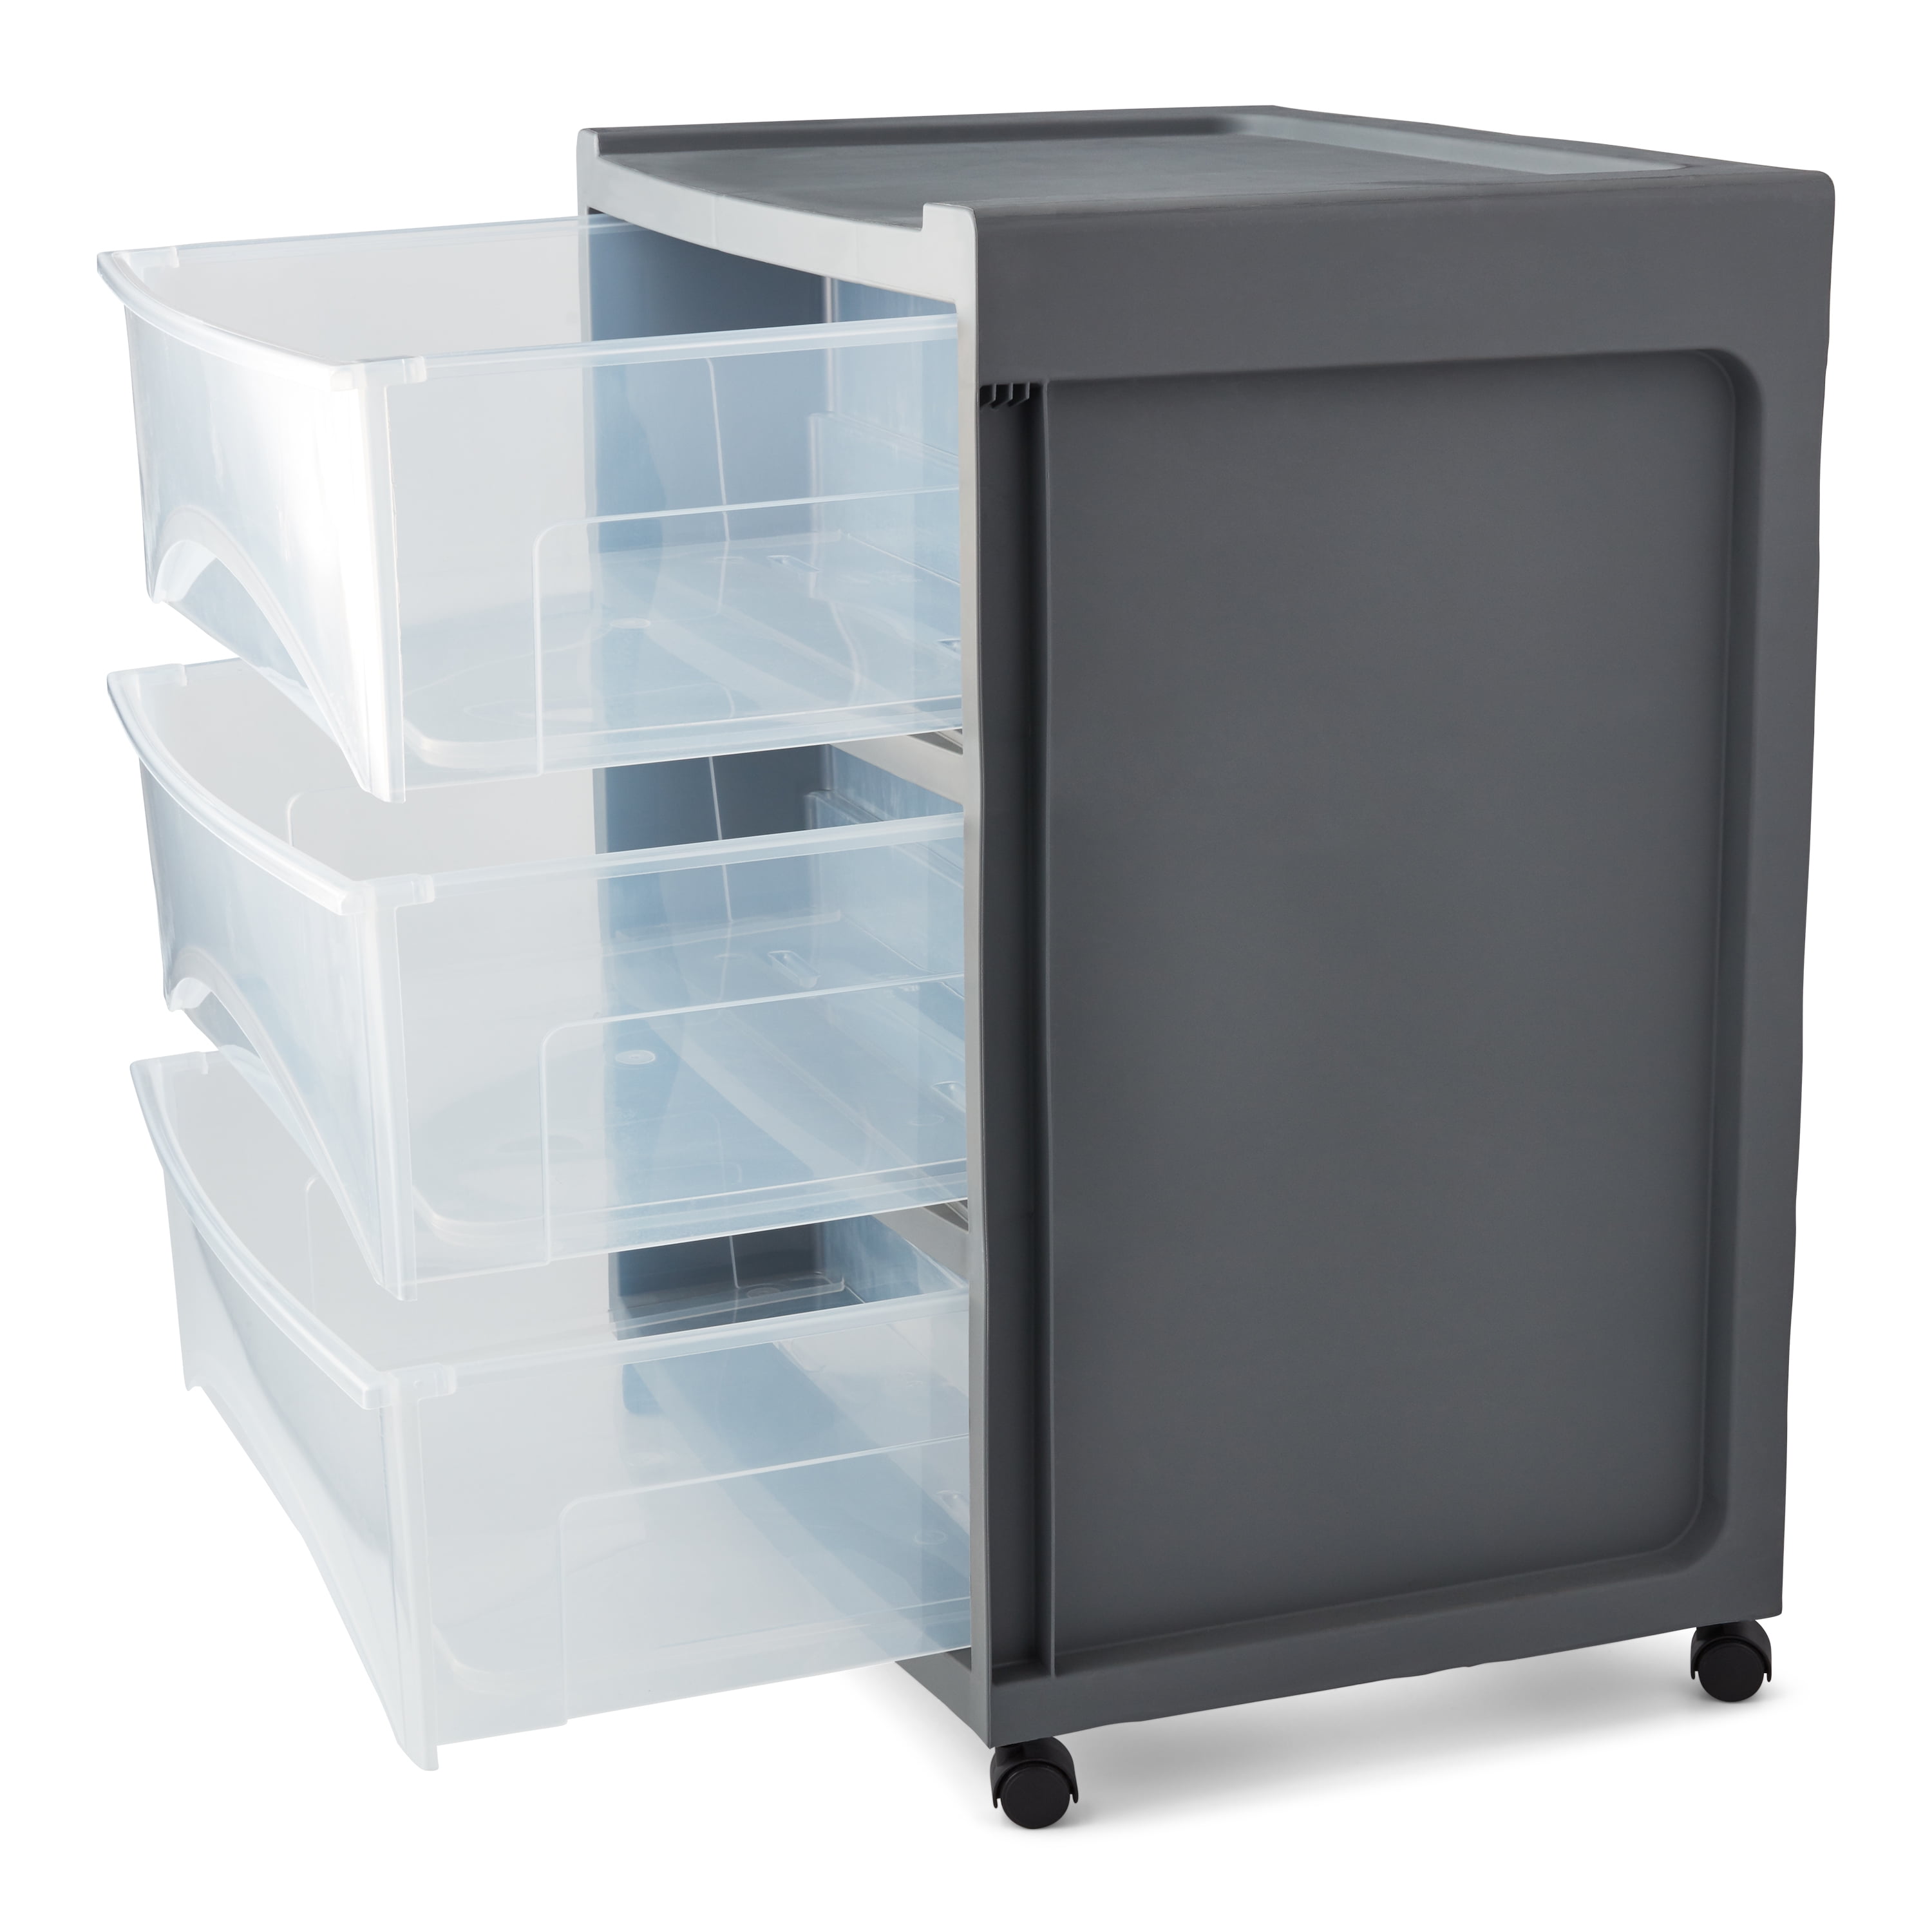 Mainstays 3 Drawer Wide Mint Storage Cart, File Cabinet for A4 And